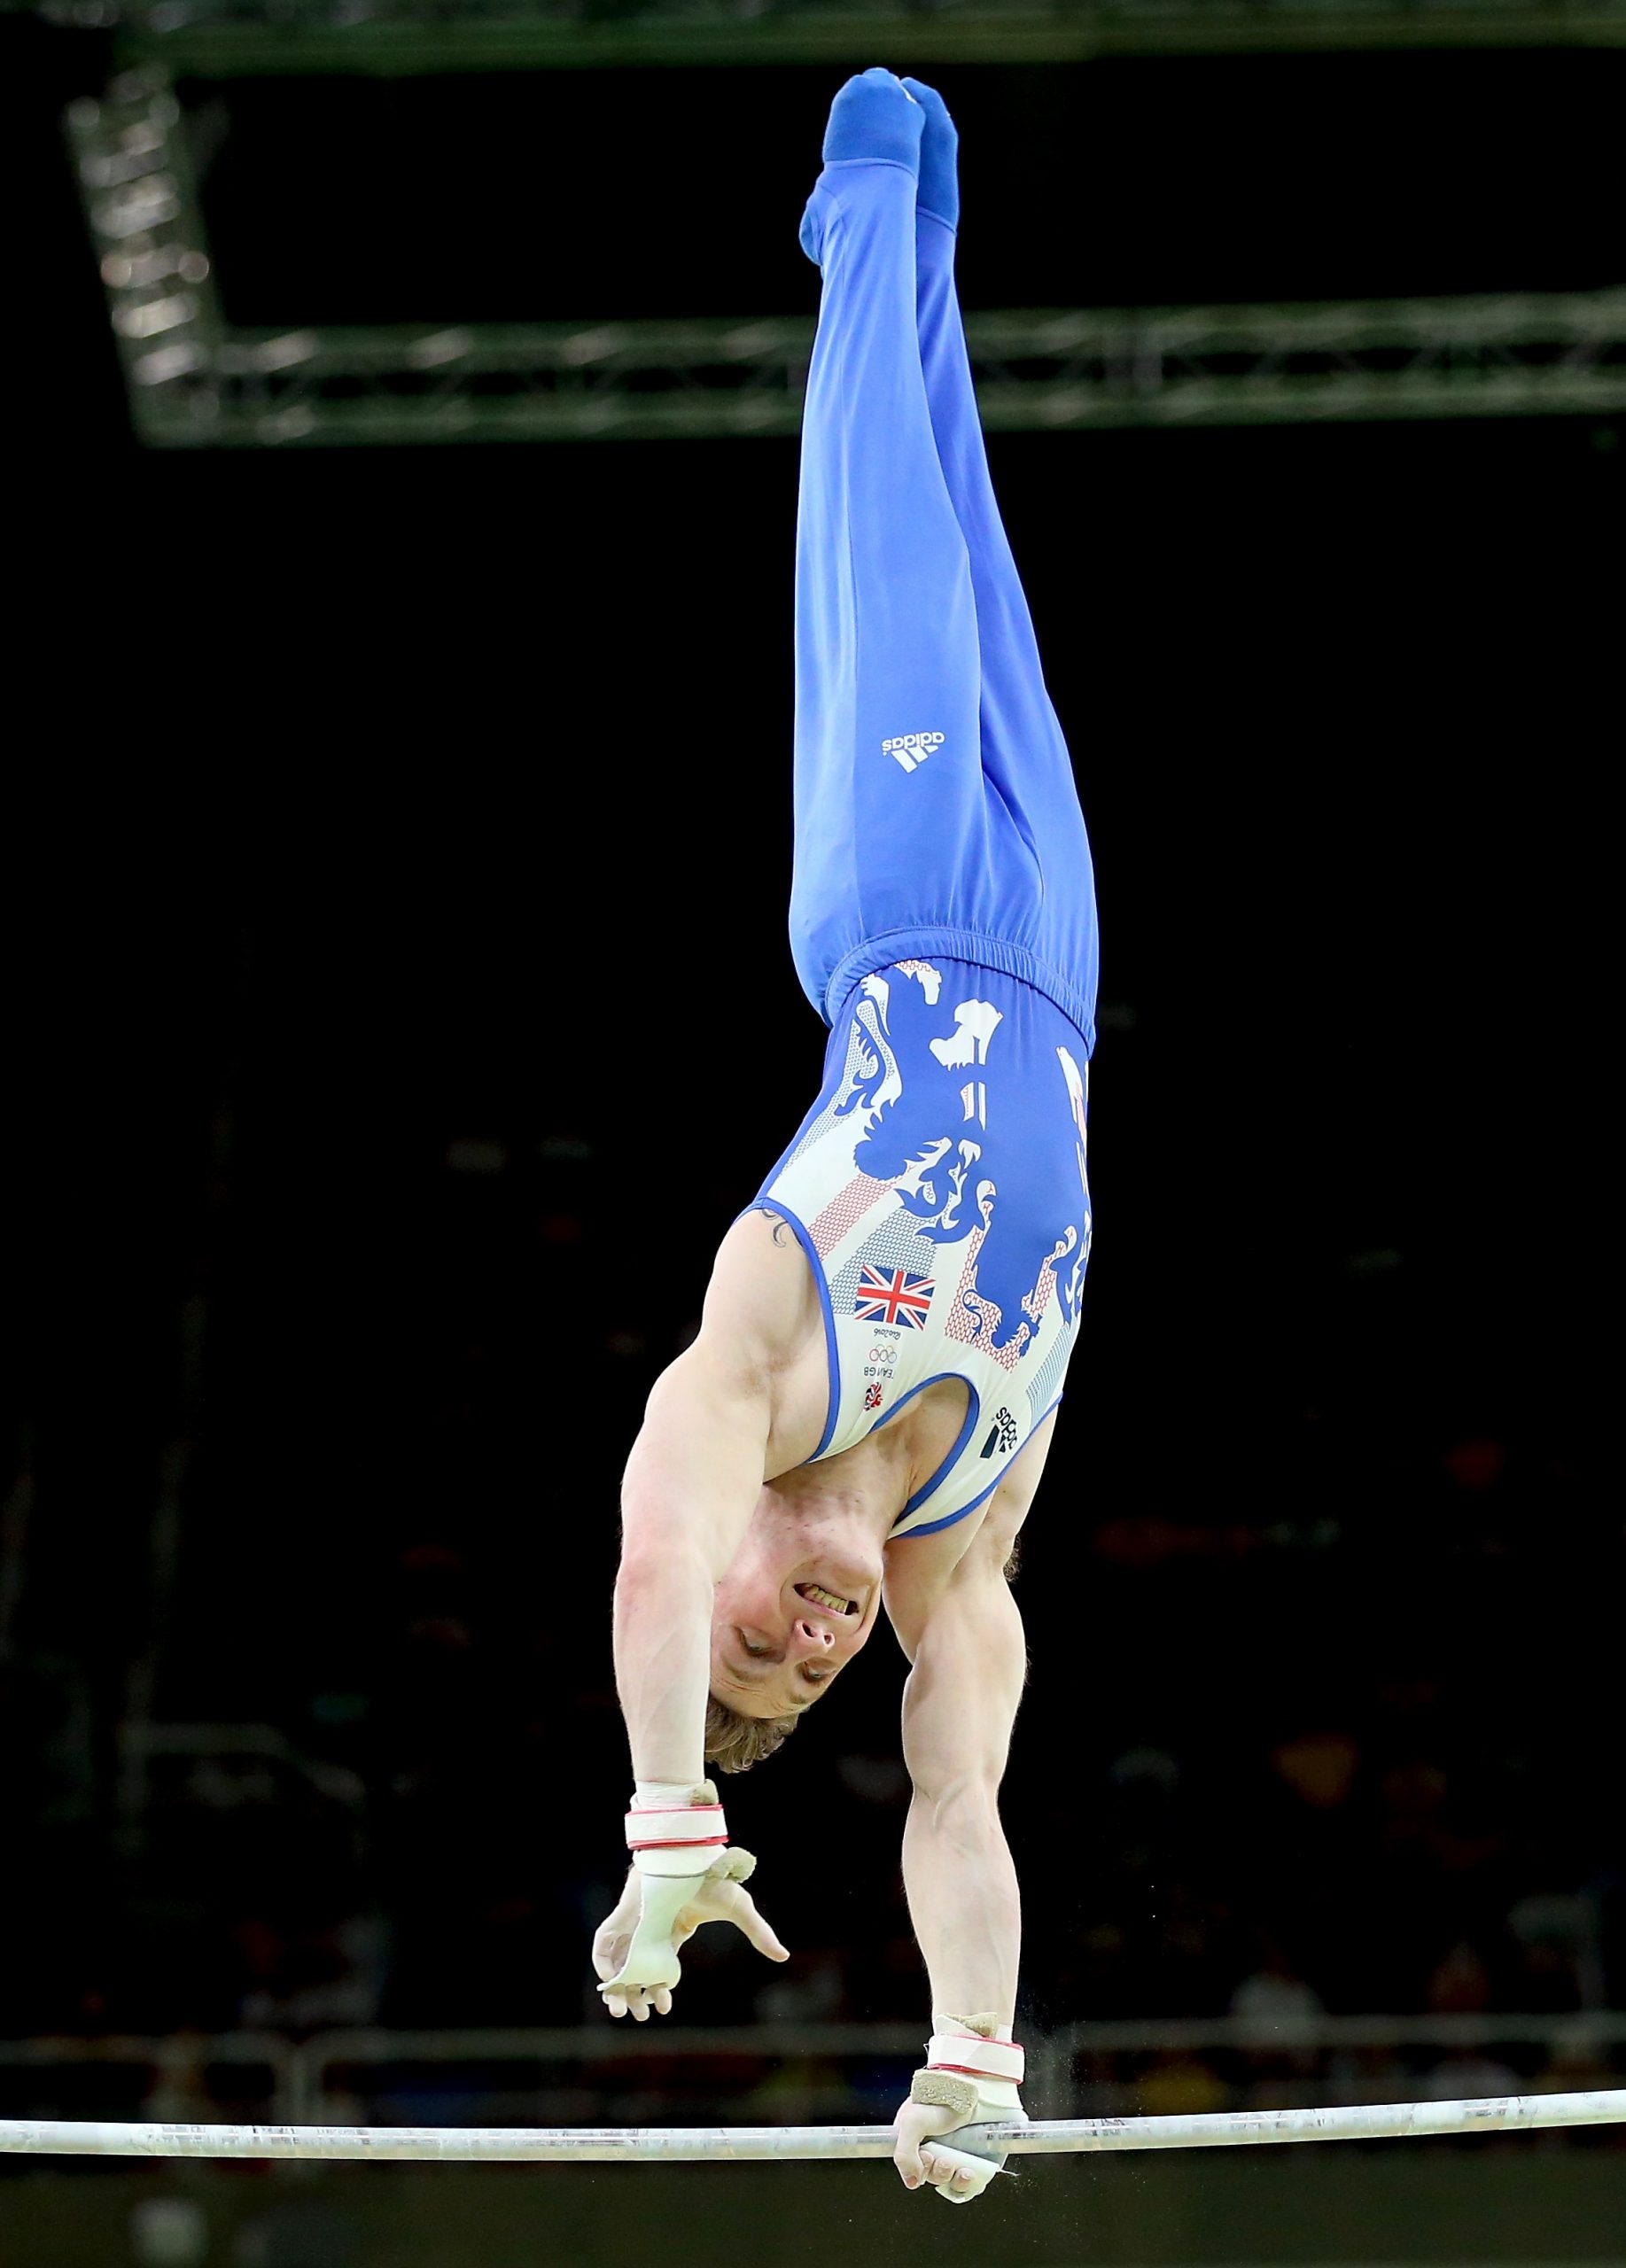 Nile Wilson taking the bronze medal on high bar at the Rio Olympic Games 2016